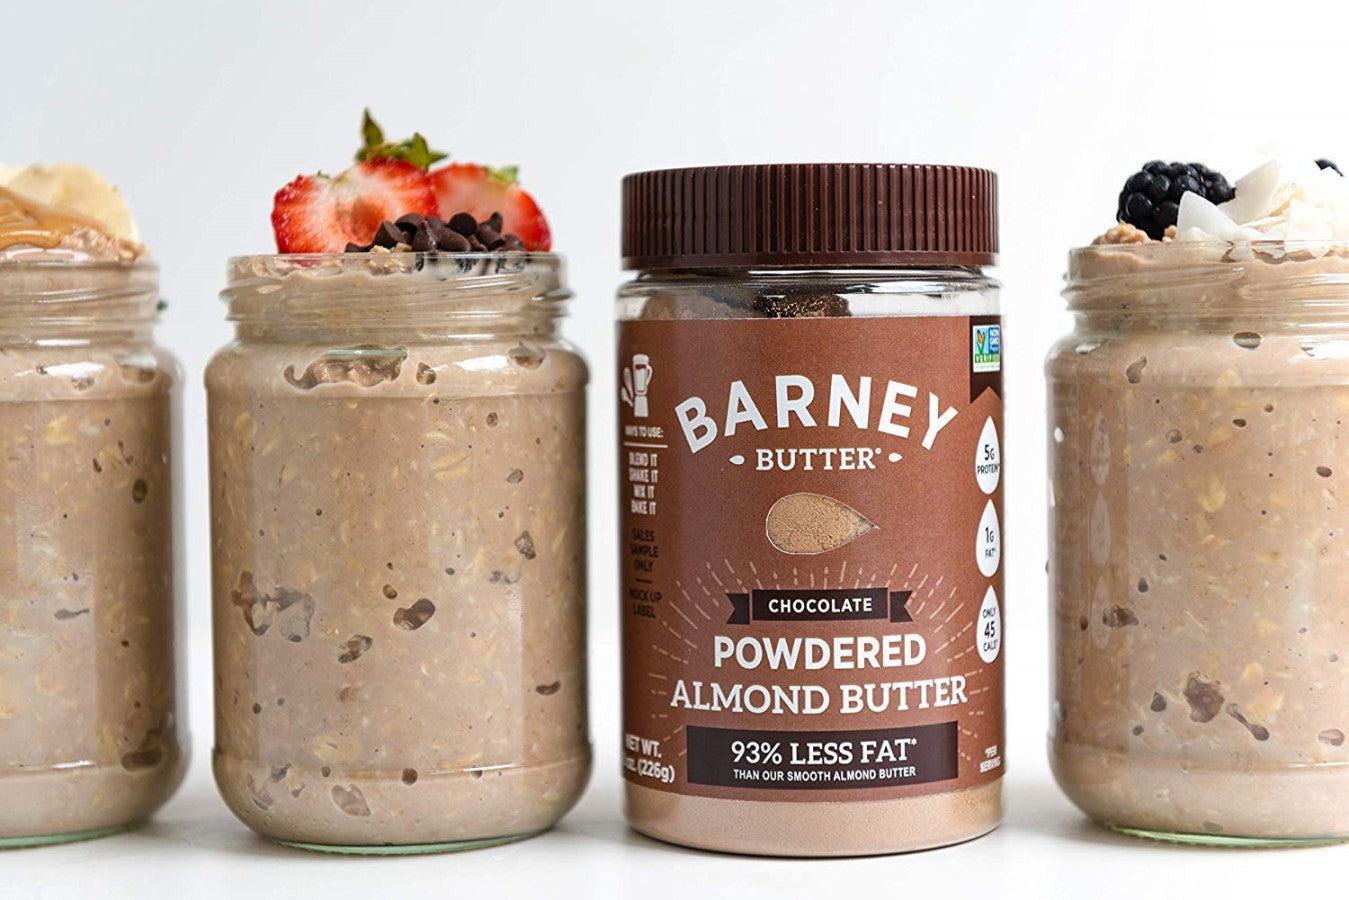 Chocolaty Smoothies Made With Non-GMO Barney Butter Powdered Chocolate Almond Butter With Less Fat